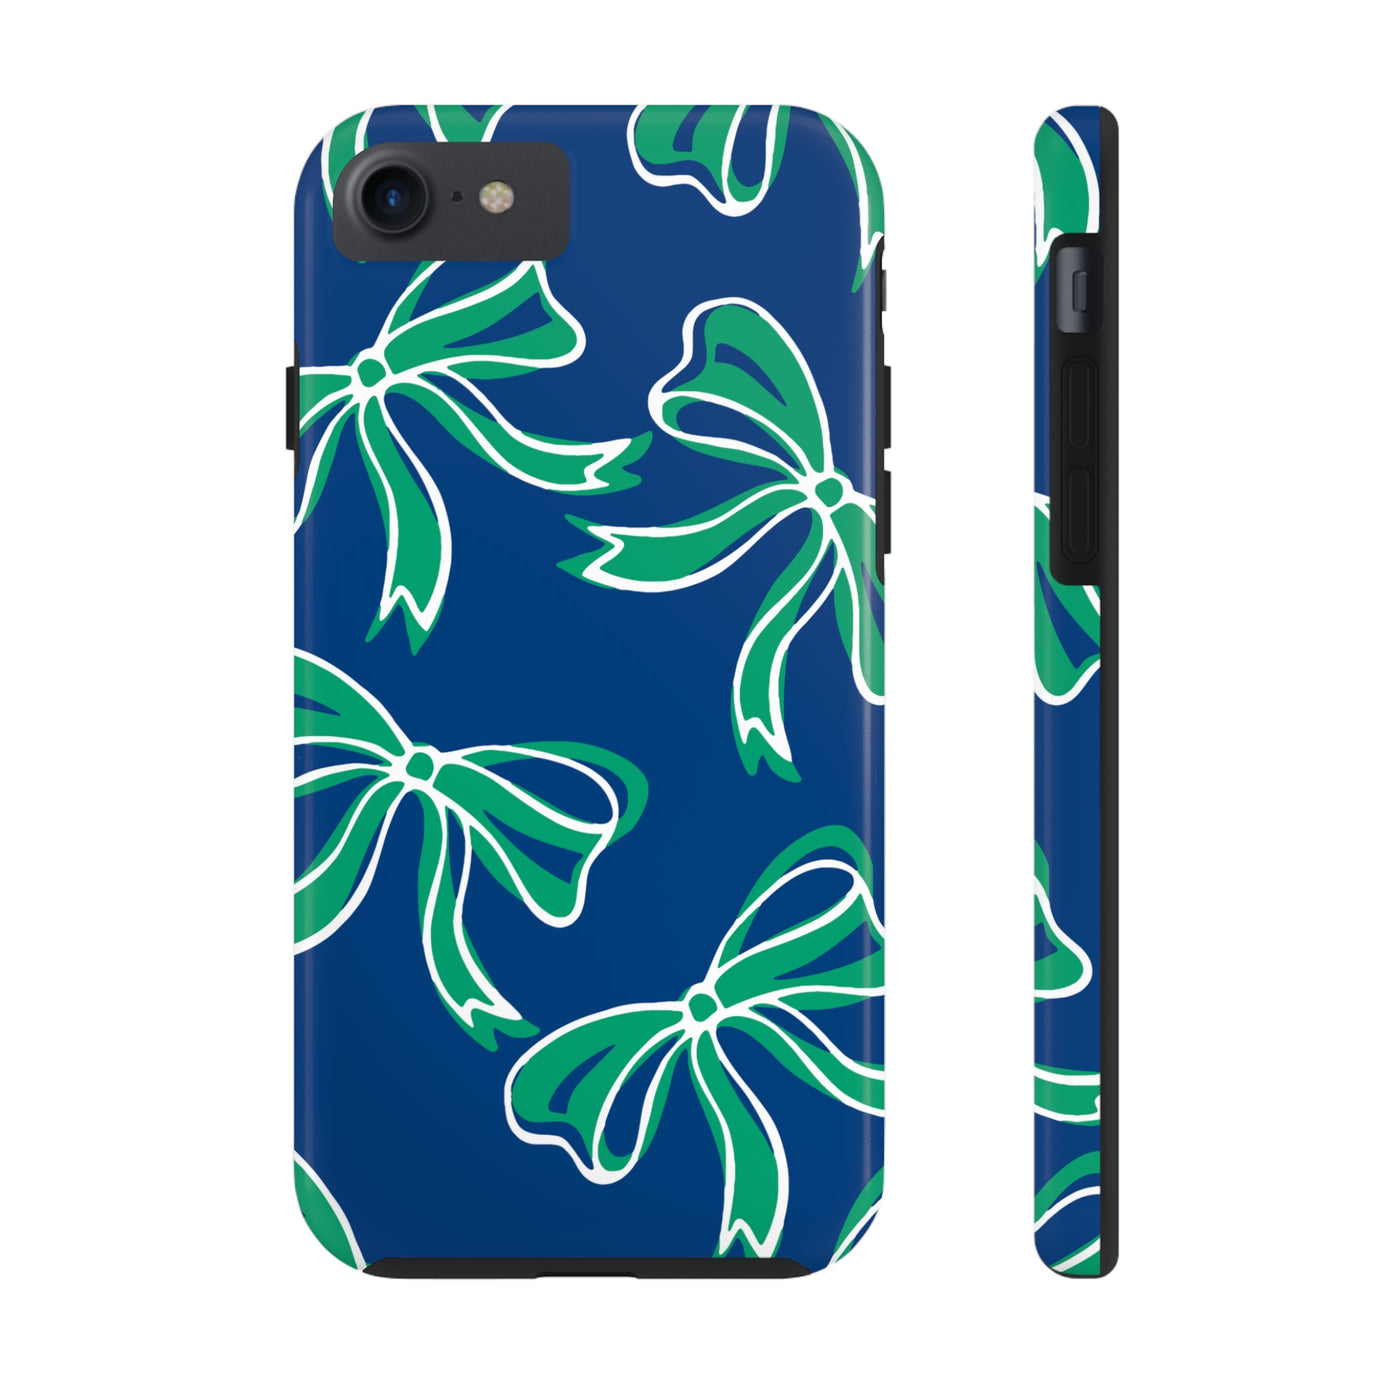 Trendy Bow Phone Case, Bed Party Bow Iphone case, Bow Phone Case, - FGCU, Blue and Green, Florida Gulf Coast